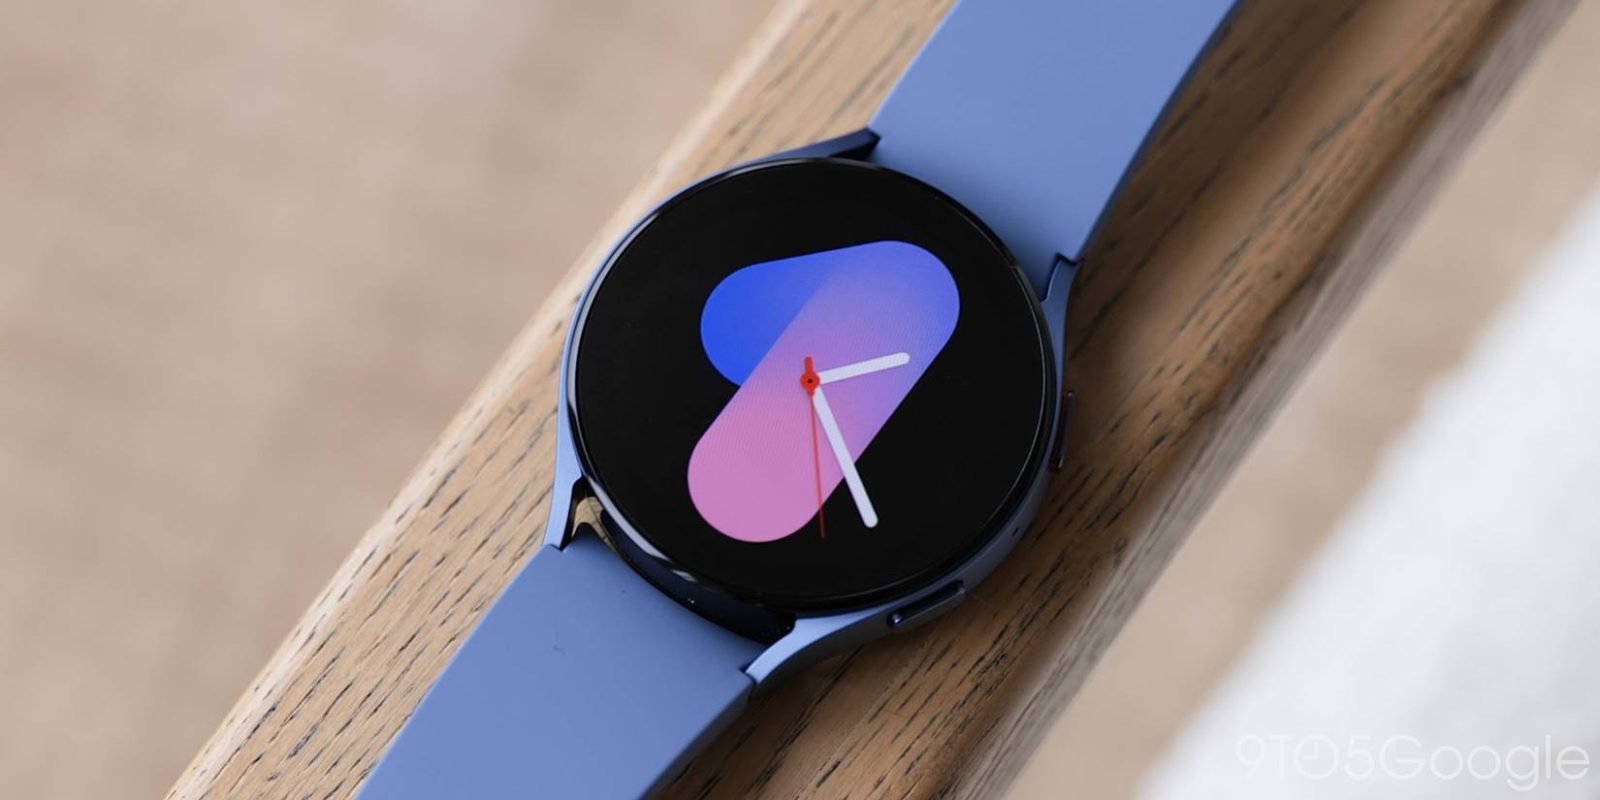 Future Wear OS Smartwatches Will Bring Auto-Rotate Feature